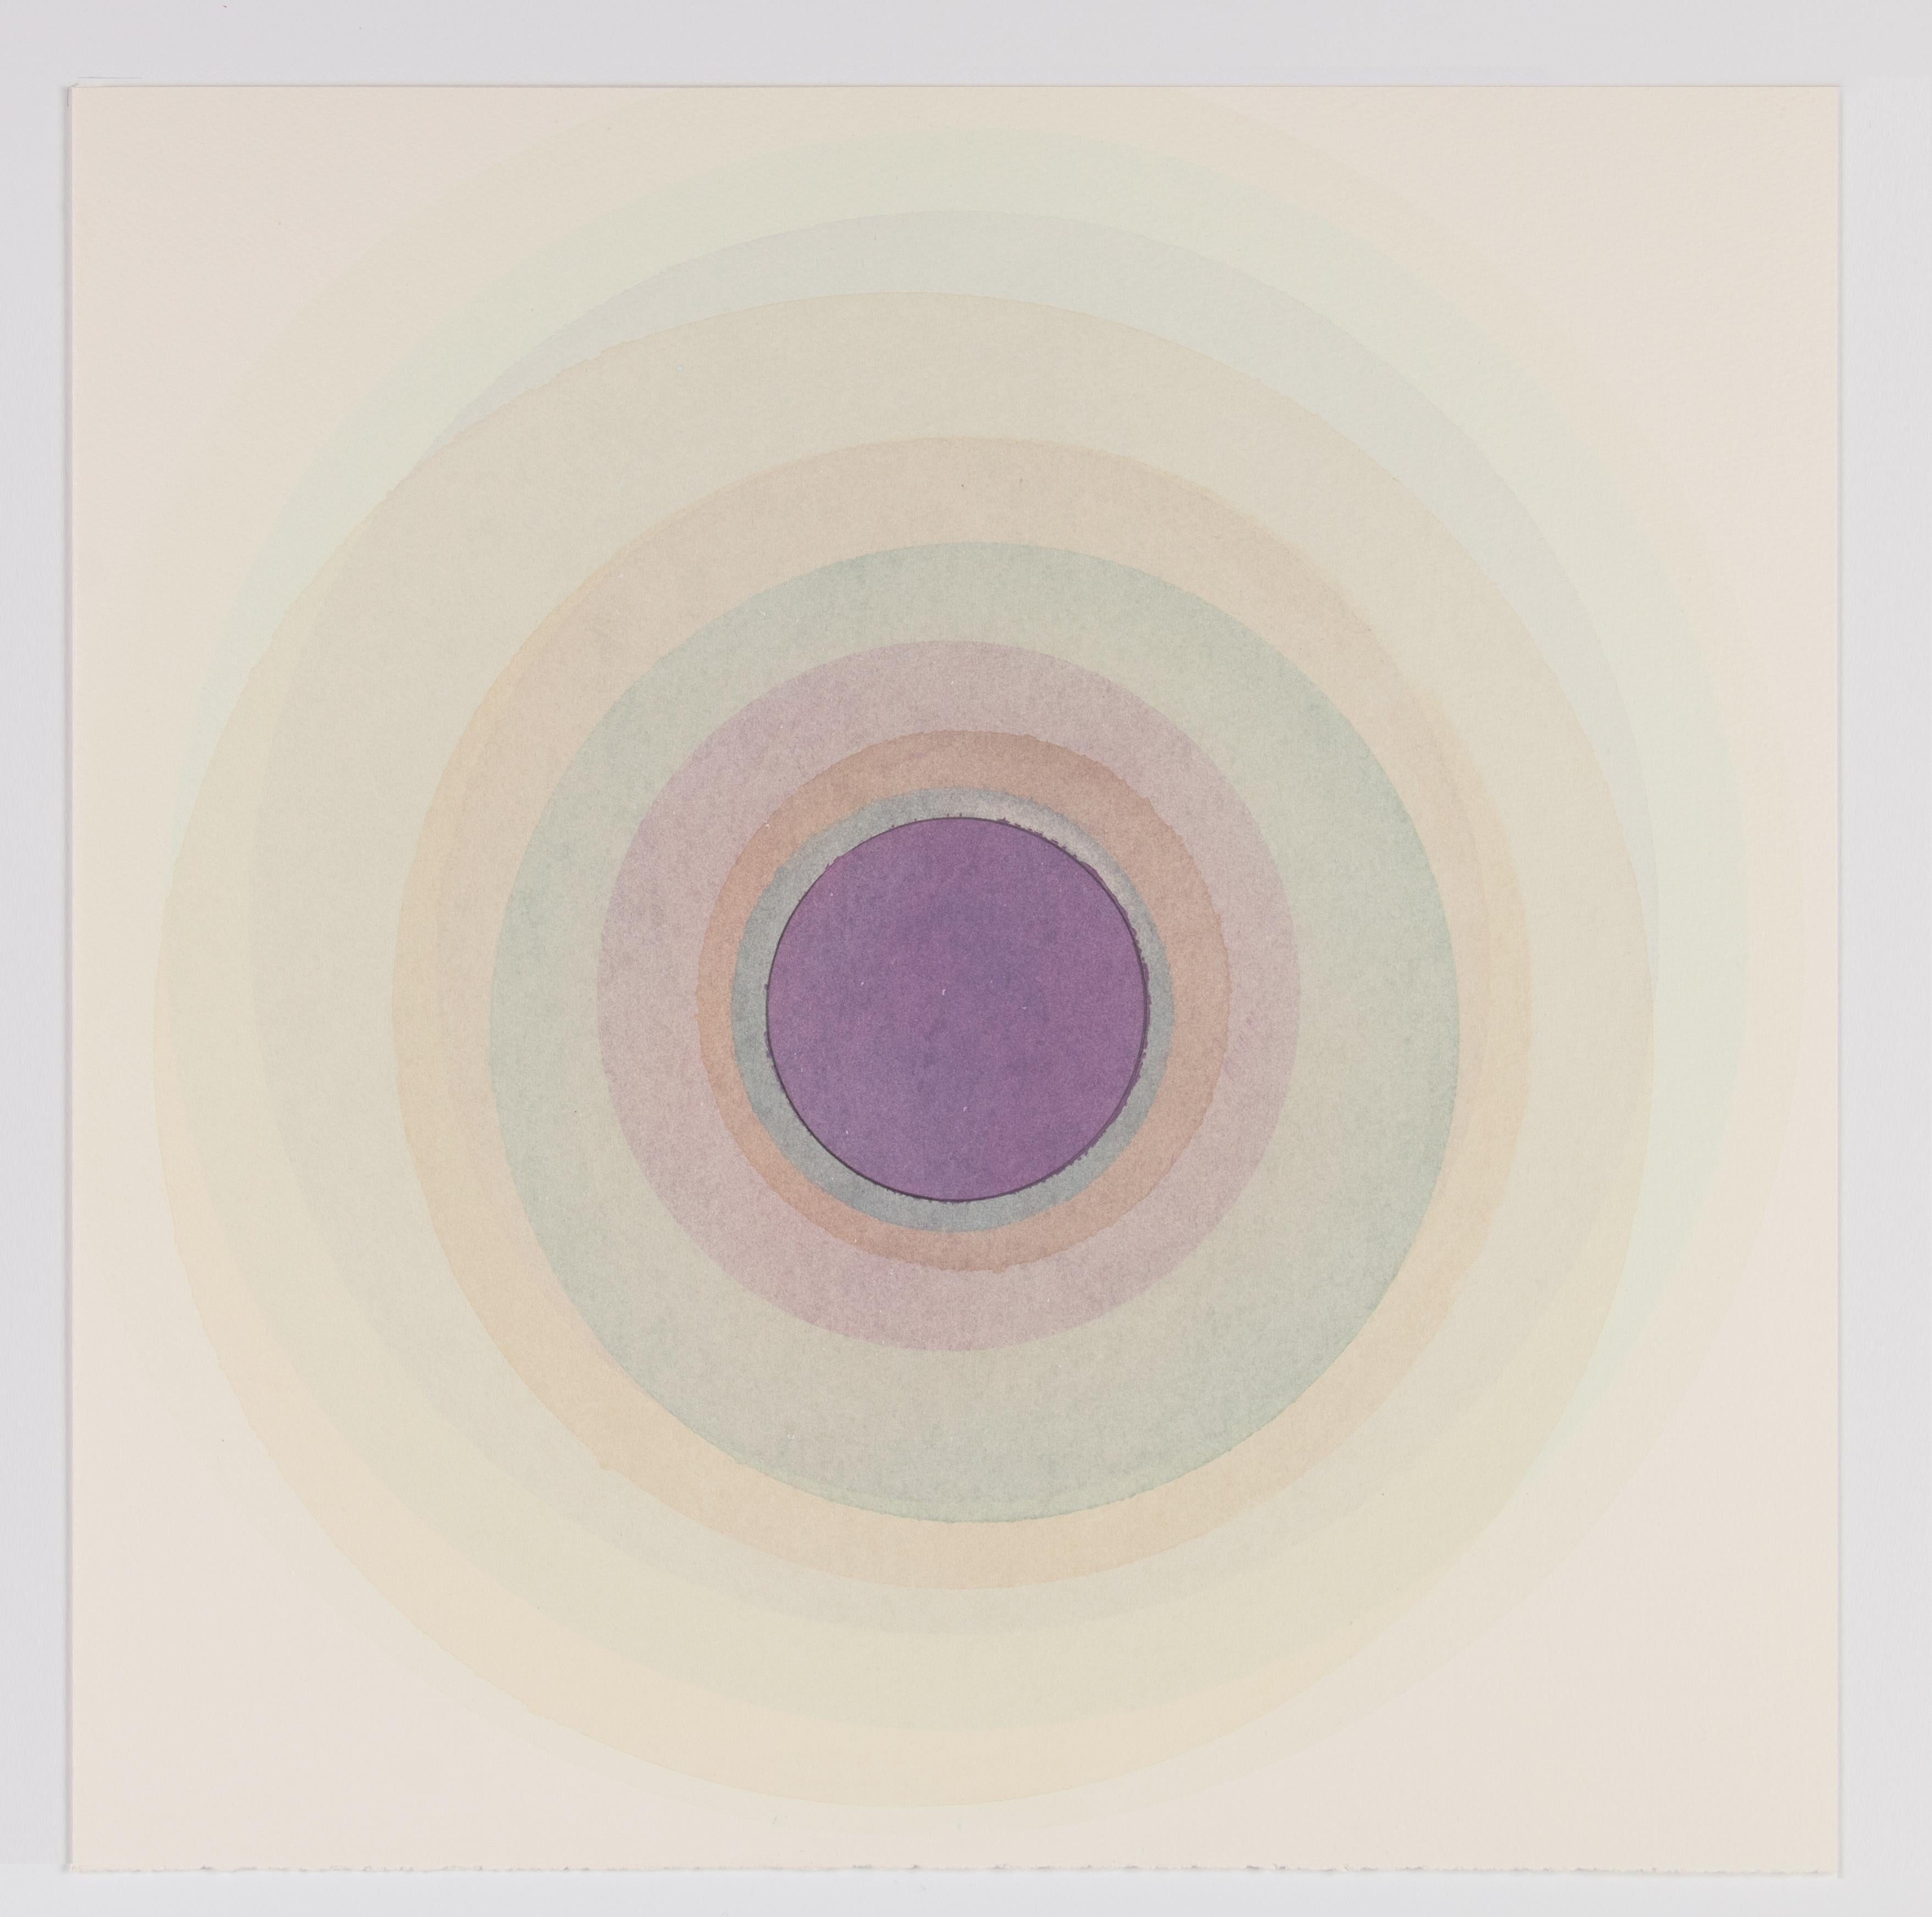 Coaxist 10419 - Soft pastel color abstract geometric circle watercolor on paper